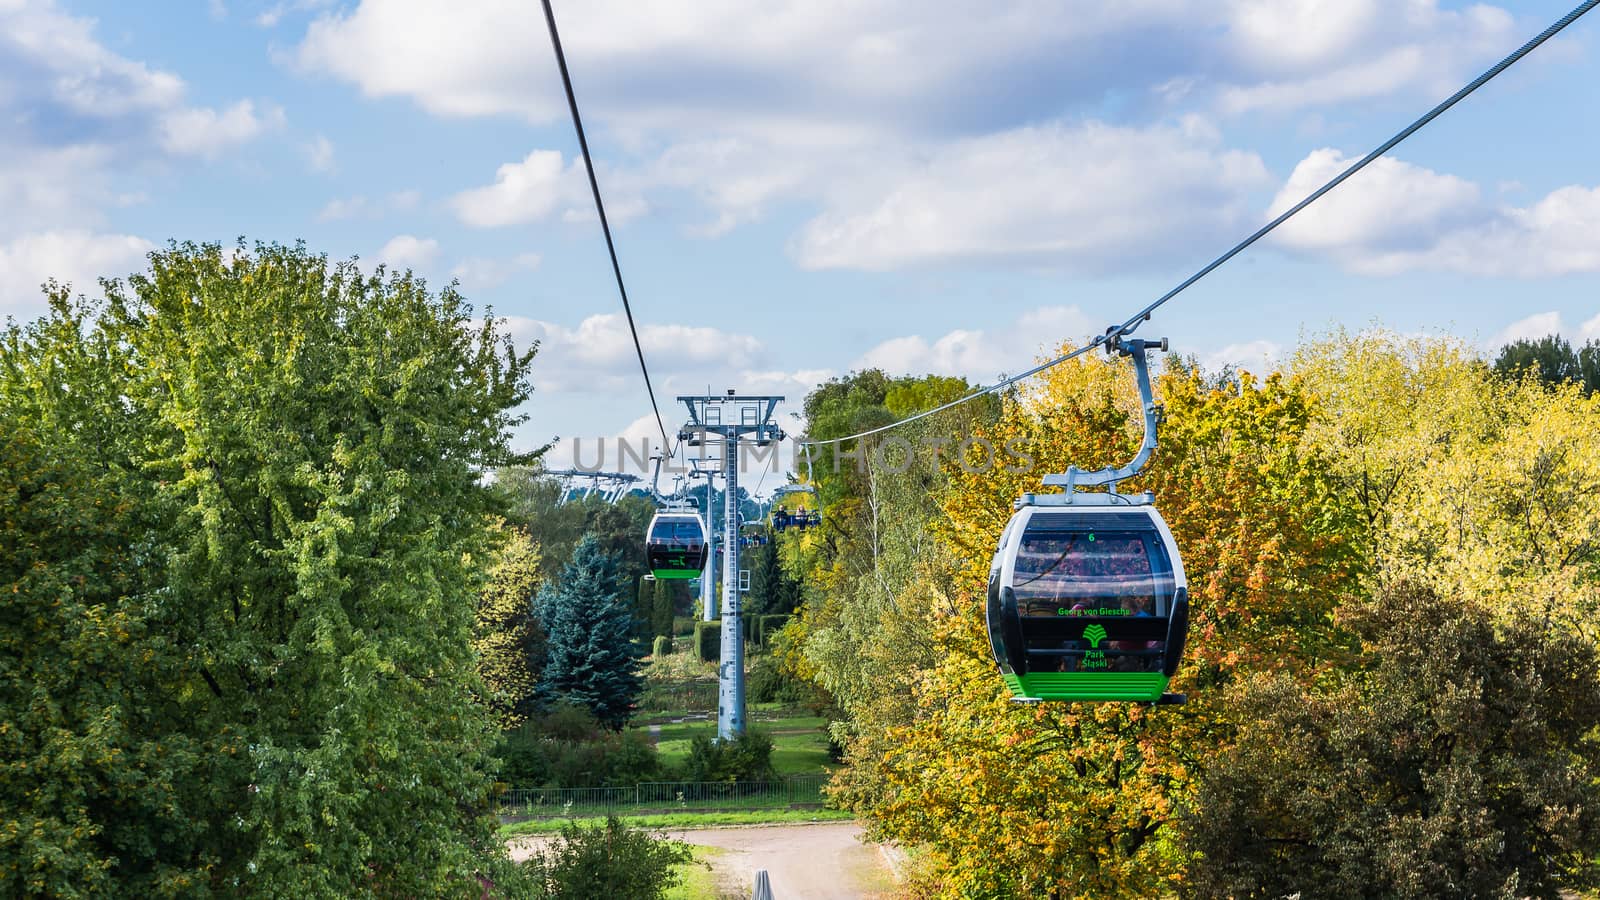 The ropeway in Silesia Park in Chorzow. Silesia Park is the largest greenery area in the Silesian agglomeration, the most industrialized region in Poland.